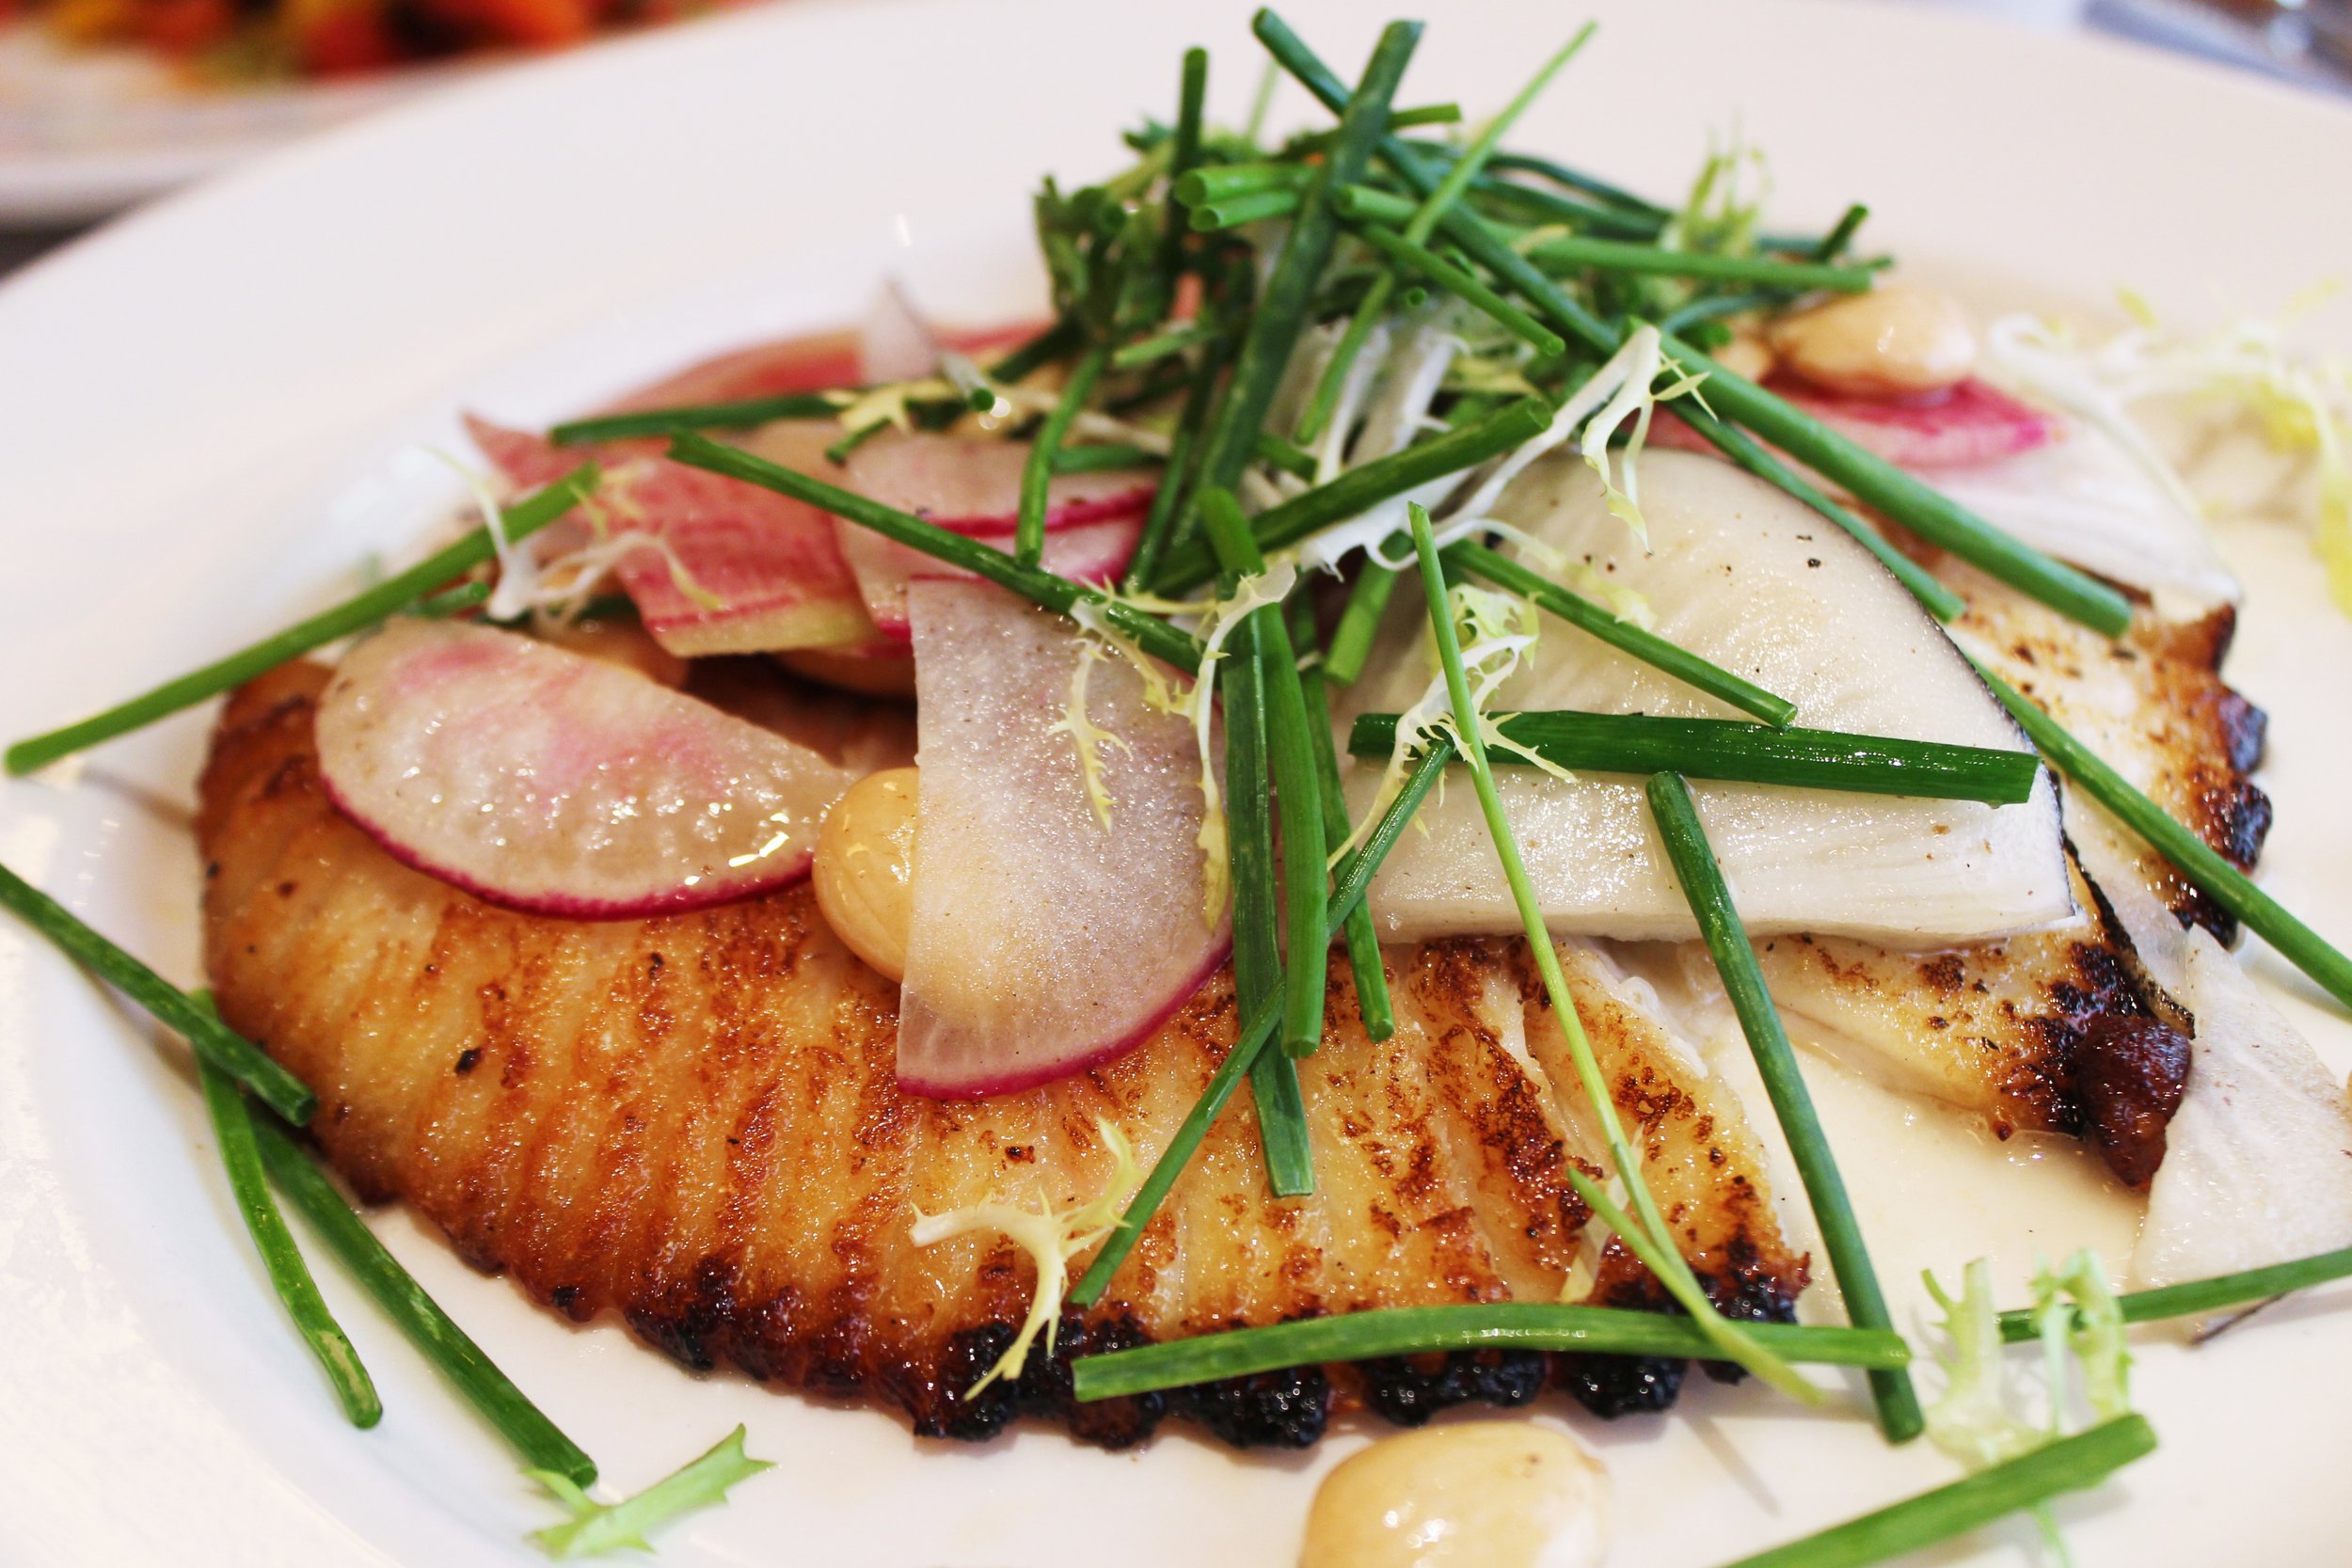 Sautéed Skate with summer beans, radish, marcona almonds and spring onion soubise